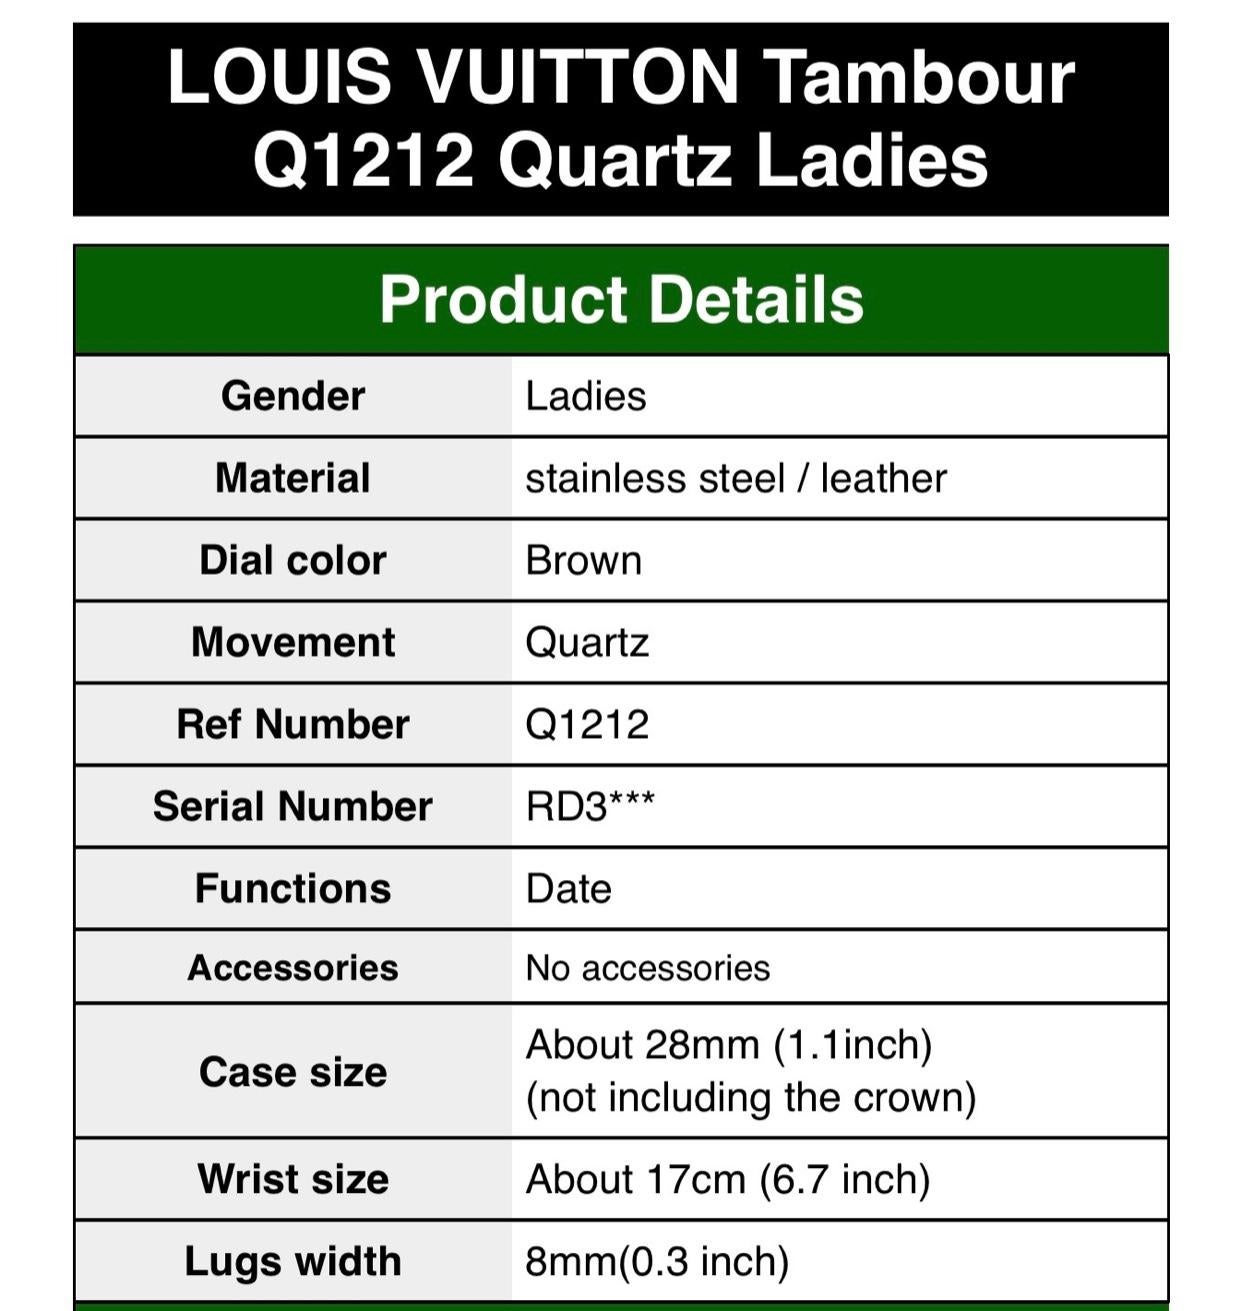 
Louis Vuitton Tambour Q1212 Quartz Ladies Watch , Louis Vuitton Monogram Leather Belt .
Ladies
Stainless Steel/leather
Brown
Quartz
Q1212
28 mm (1.1 Inch )
Wrist Size 17 cm
Lugs Width 8 mm
For details please look at the pictures.
Made in France
I